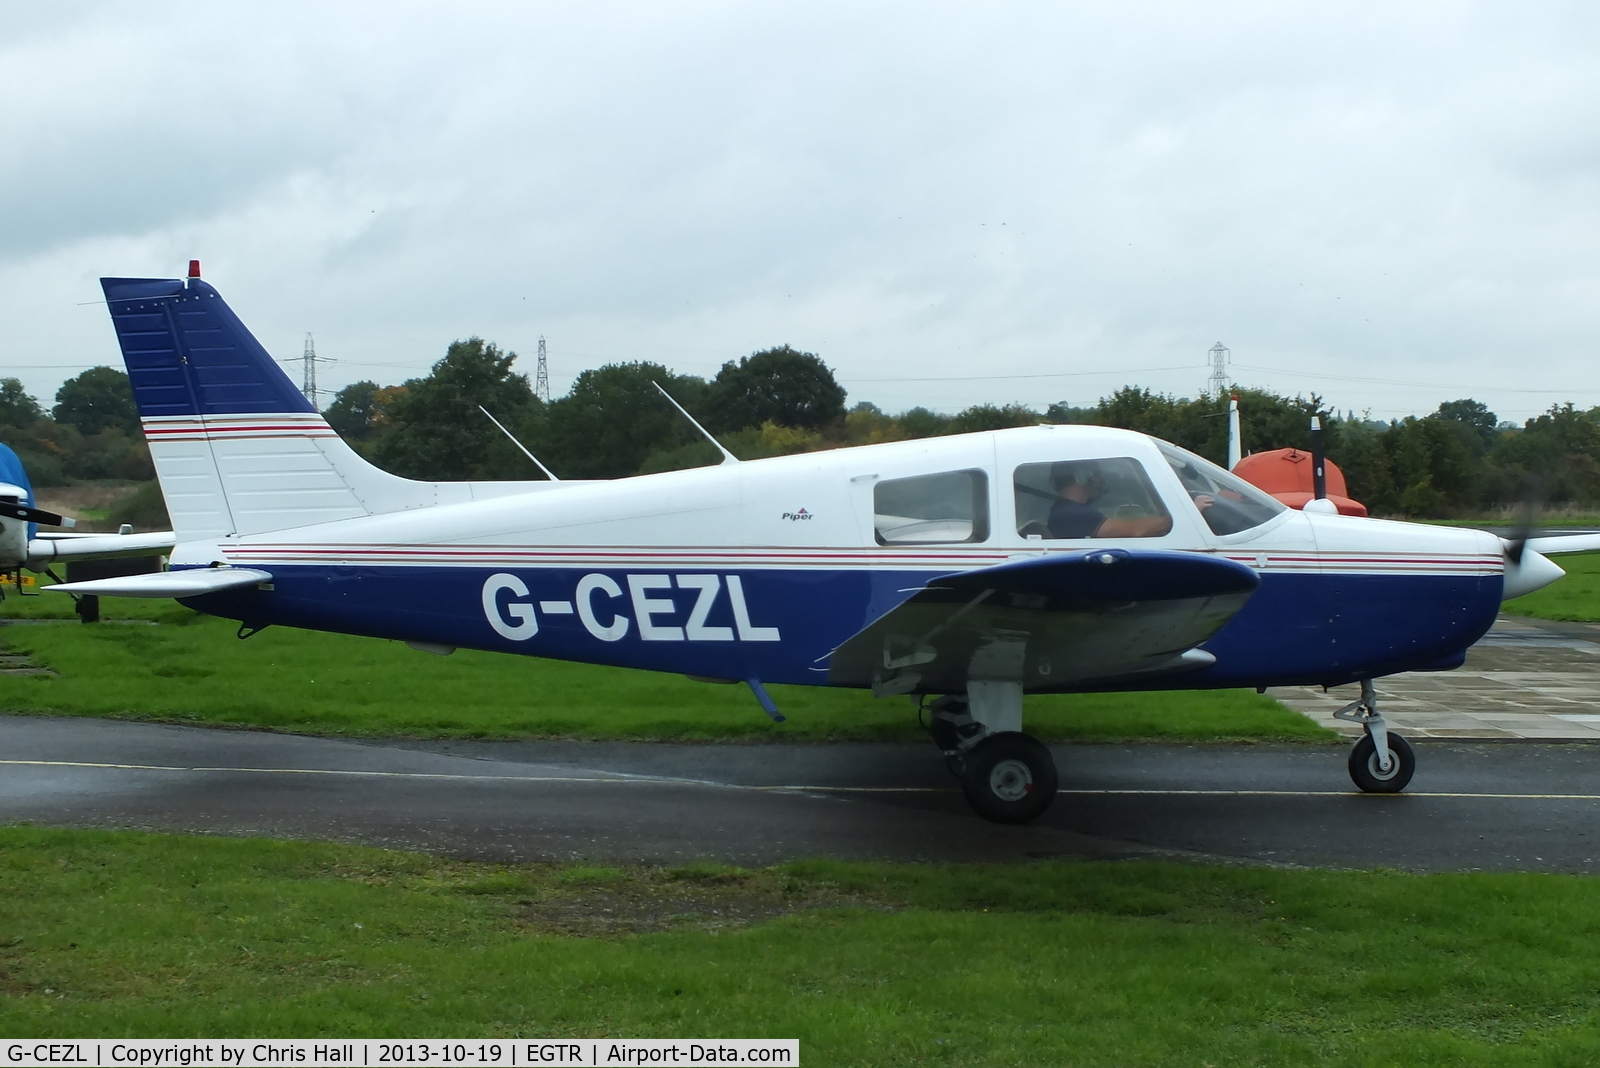 G-CEZL, 1989 Piper PA-28-161 Cadet C/N 2841247, ex Cabair, now operated by Charley Ltd